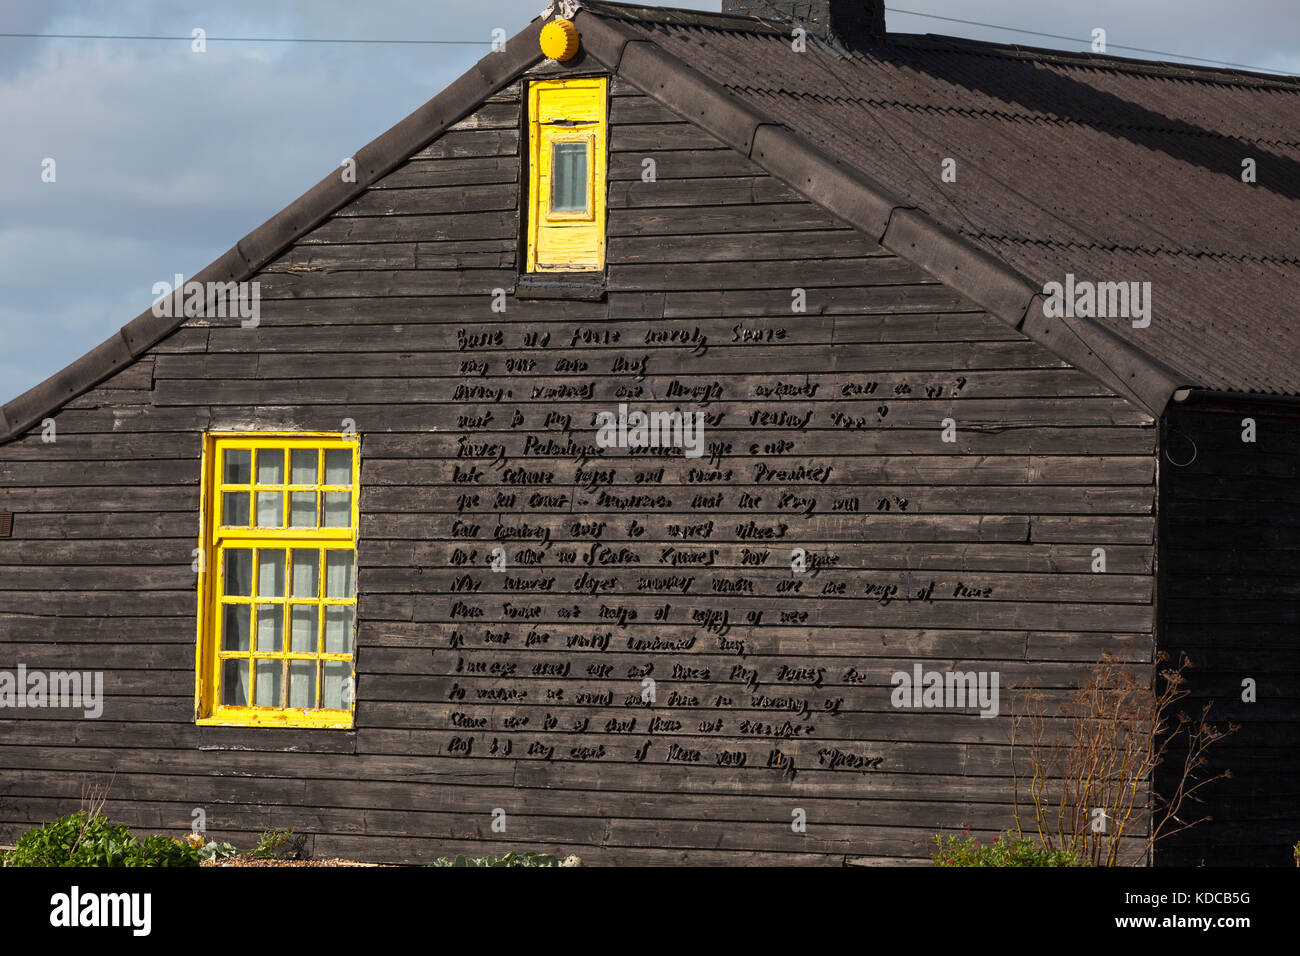 ‘Busy old fool, unruly sun’: John Donne’s iconic poem adorns the side of Prospect Cottage lived in by the late Derek Jarman, dungeness, kent, uk Stock Photo